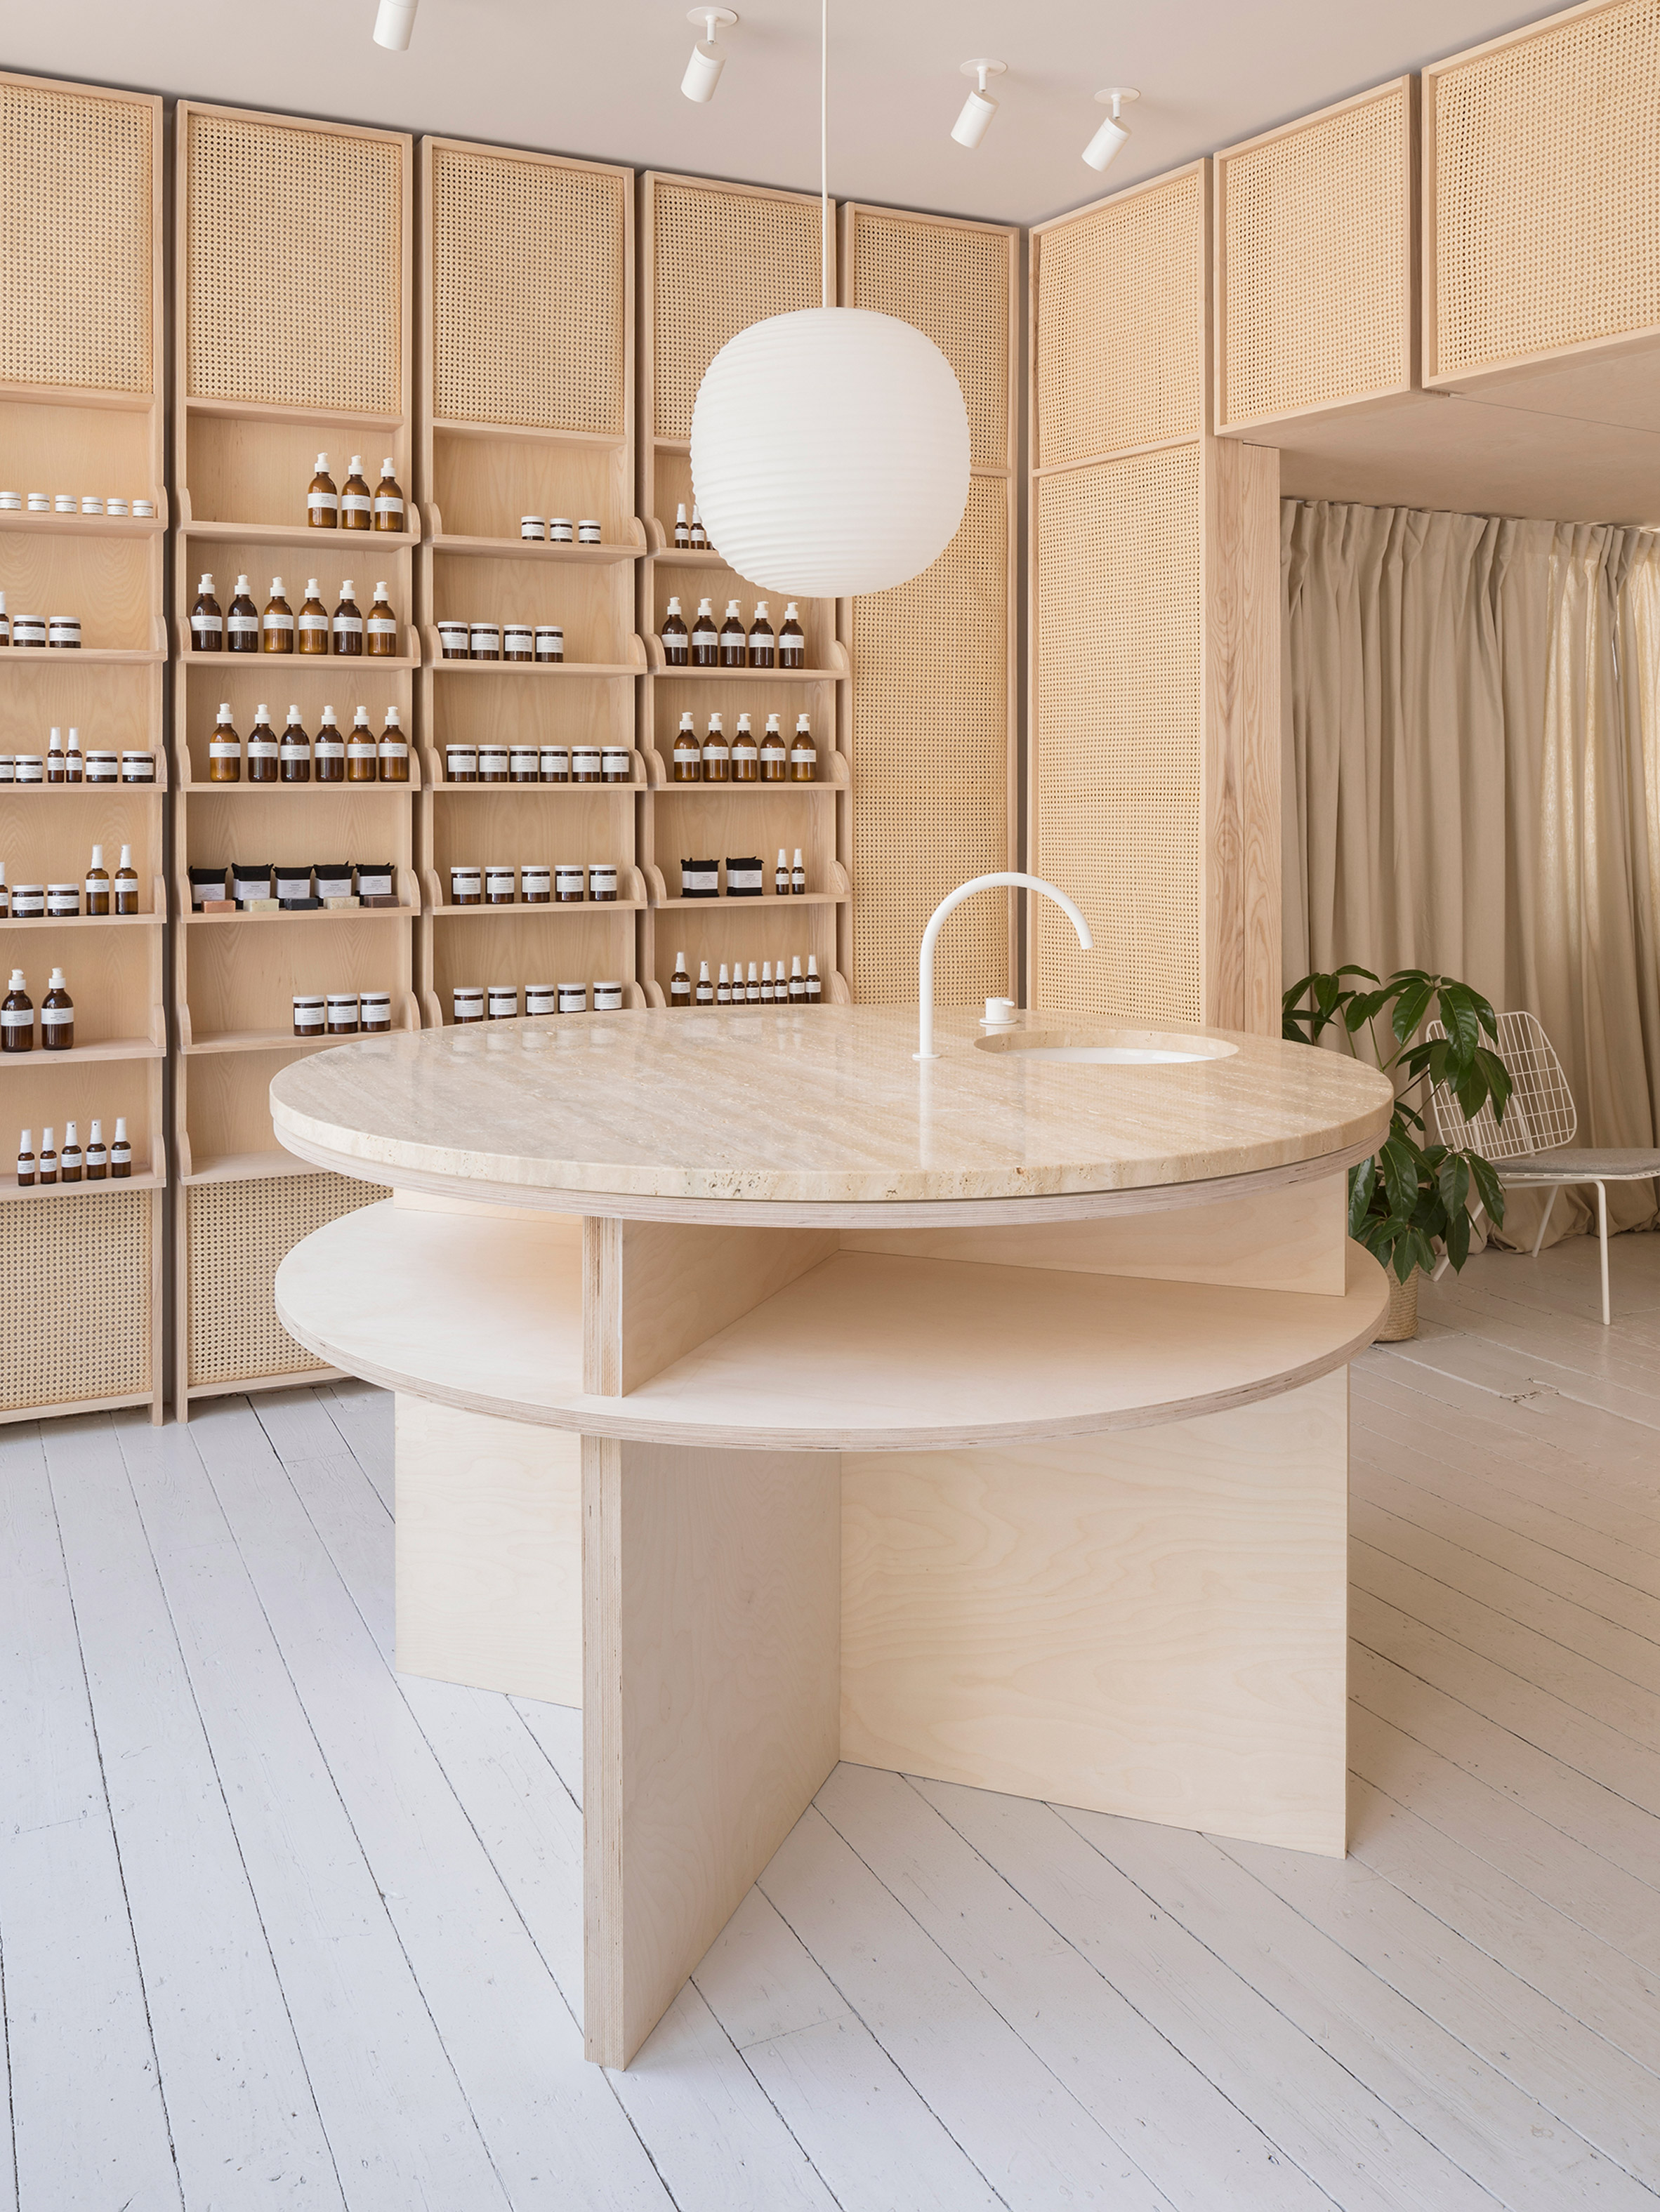 O Sullivan Skoufoglou Pairs Wooden Cabinets With Peach Hues